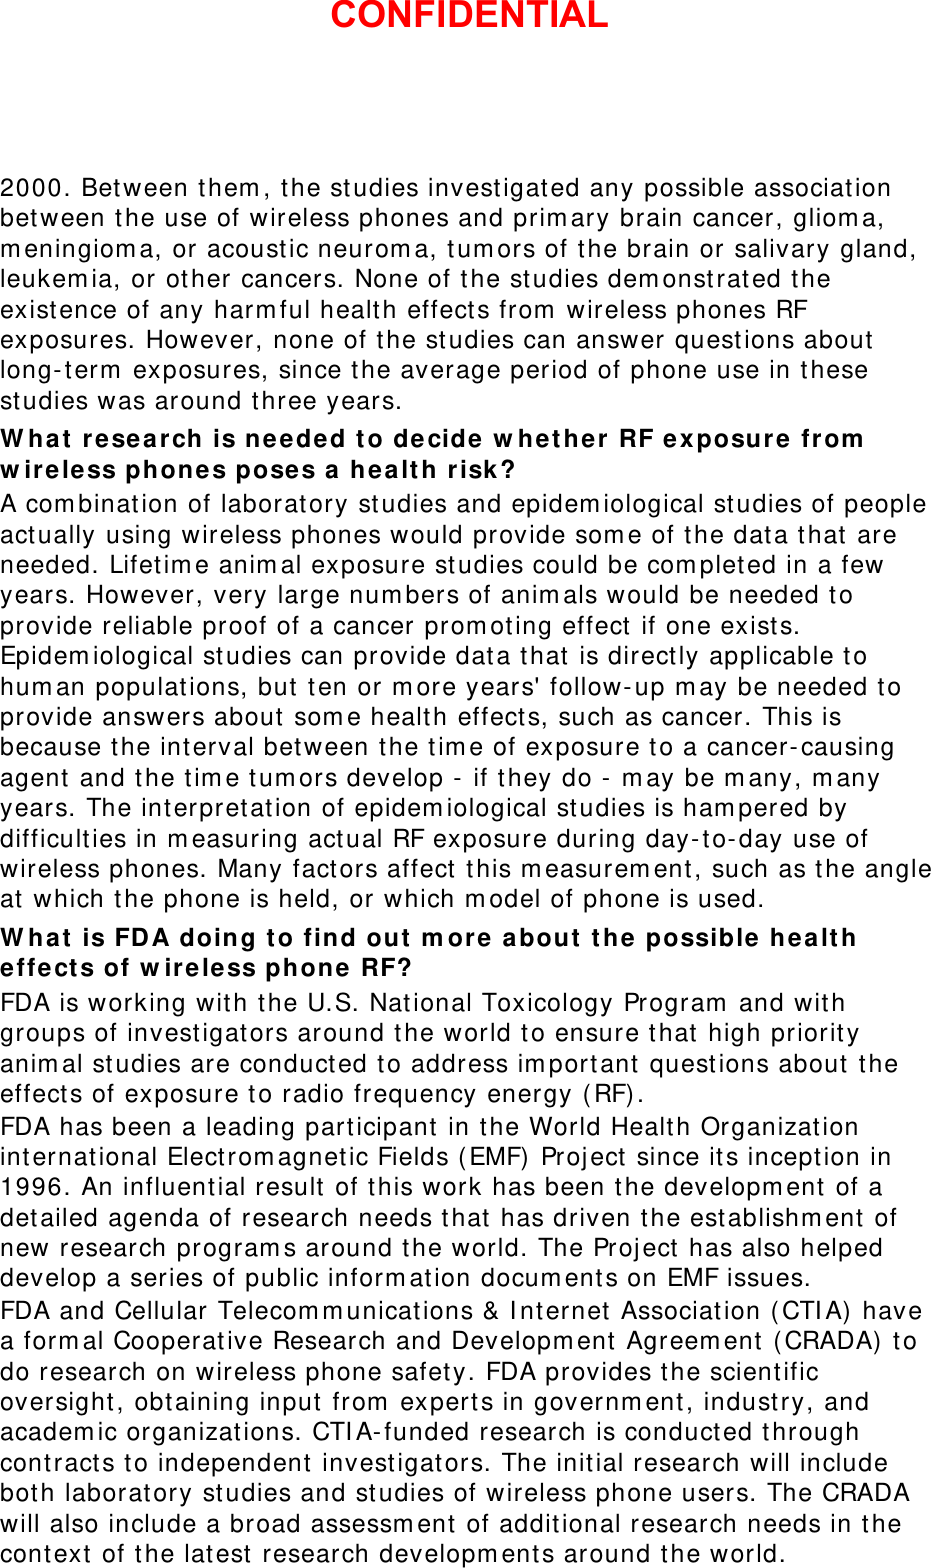 2000. Between them, the studies investigated any possible association between the use of wireless phones and primary brain cancer, glioma, meningioma, or acoustic neuroma, tumors of the brain or salivary gland, leukemia, or other cancers. None of the studies demonstrated the existence of any harmful health effects from wireless phones RF exposures. However, none of the studies can answer questions about long-term exposures, since the average period of phone use in these studies was around three years. What research is needed to decide whether RF exposure from wireless phones poses a health risk? A combination of laboratory studies and epidemiological studies of people actually using wireless phones would provide some of the data that are needed. Lifetime animal exposure studies could be completed in a few years. However, very large numbers of animals would be needed to provide reliable proof of a cancer promoting effect if one exists. Epidemiological studies can provide data that is directly applicable to human populations, but ten or more years&apos; follow-up may be needed to provide answers about some health effects, such as cancer. This is because the interval between the time of exposure to a cancer-causing agent and the time tumors develop - if they do - may be many, many years. The interpretation of epidemiological studies is hampered by difficulties in measuring actual RF exposure during day-to-day use of wireless phones. Many factors affect this measurement, such as the angle at which the phone is held, or which model of phone is used. What is FDA doing to find out more about the possible health effects of wireless phone RF? FDA is working with the U.S. National Toxicology Program and with groups of investigators around the world to ensure that high priority animal studies are conducted to address important questions about the effects of exposure to radio frequency energy (RF). FDA has been a leading participant in the World Health Organization international Electromagnetic Fields (EMF) Project since its inception in 1996. An influential result of this work has been the development of a detailed agenda of research needs that has driven the establishment of new research programs around the world. The Project has also helped develop a series of public information documents on EMF issues. FDA and Cellular Telecommunications &amp; Internet Association (CTIA) have a formal Cooperative Research and Development Agreement (CRADA) to do research on wireless phone safety. FDA provides the scientific oversight, obtaining input from experts in government, industry, and academic organizations. CTIA-funded research is conducted through contracts to independent investigators. The initial research will include both laboratory studies and studies of wireless phone users. The CRADA will also include a broad assessment of additional research needs in the context of the latest research developments around the world. CONFIDENTIAL